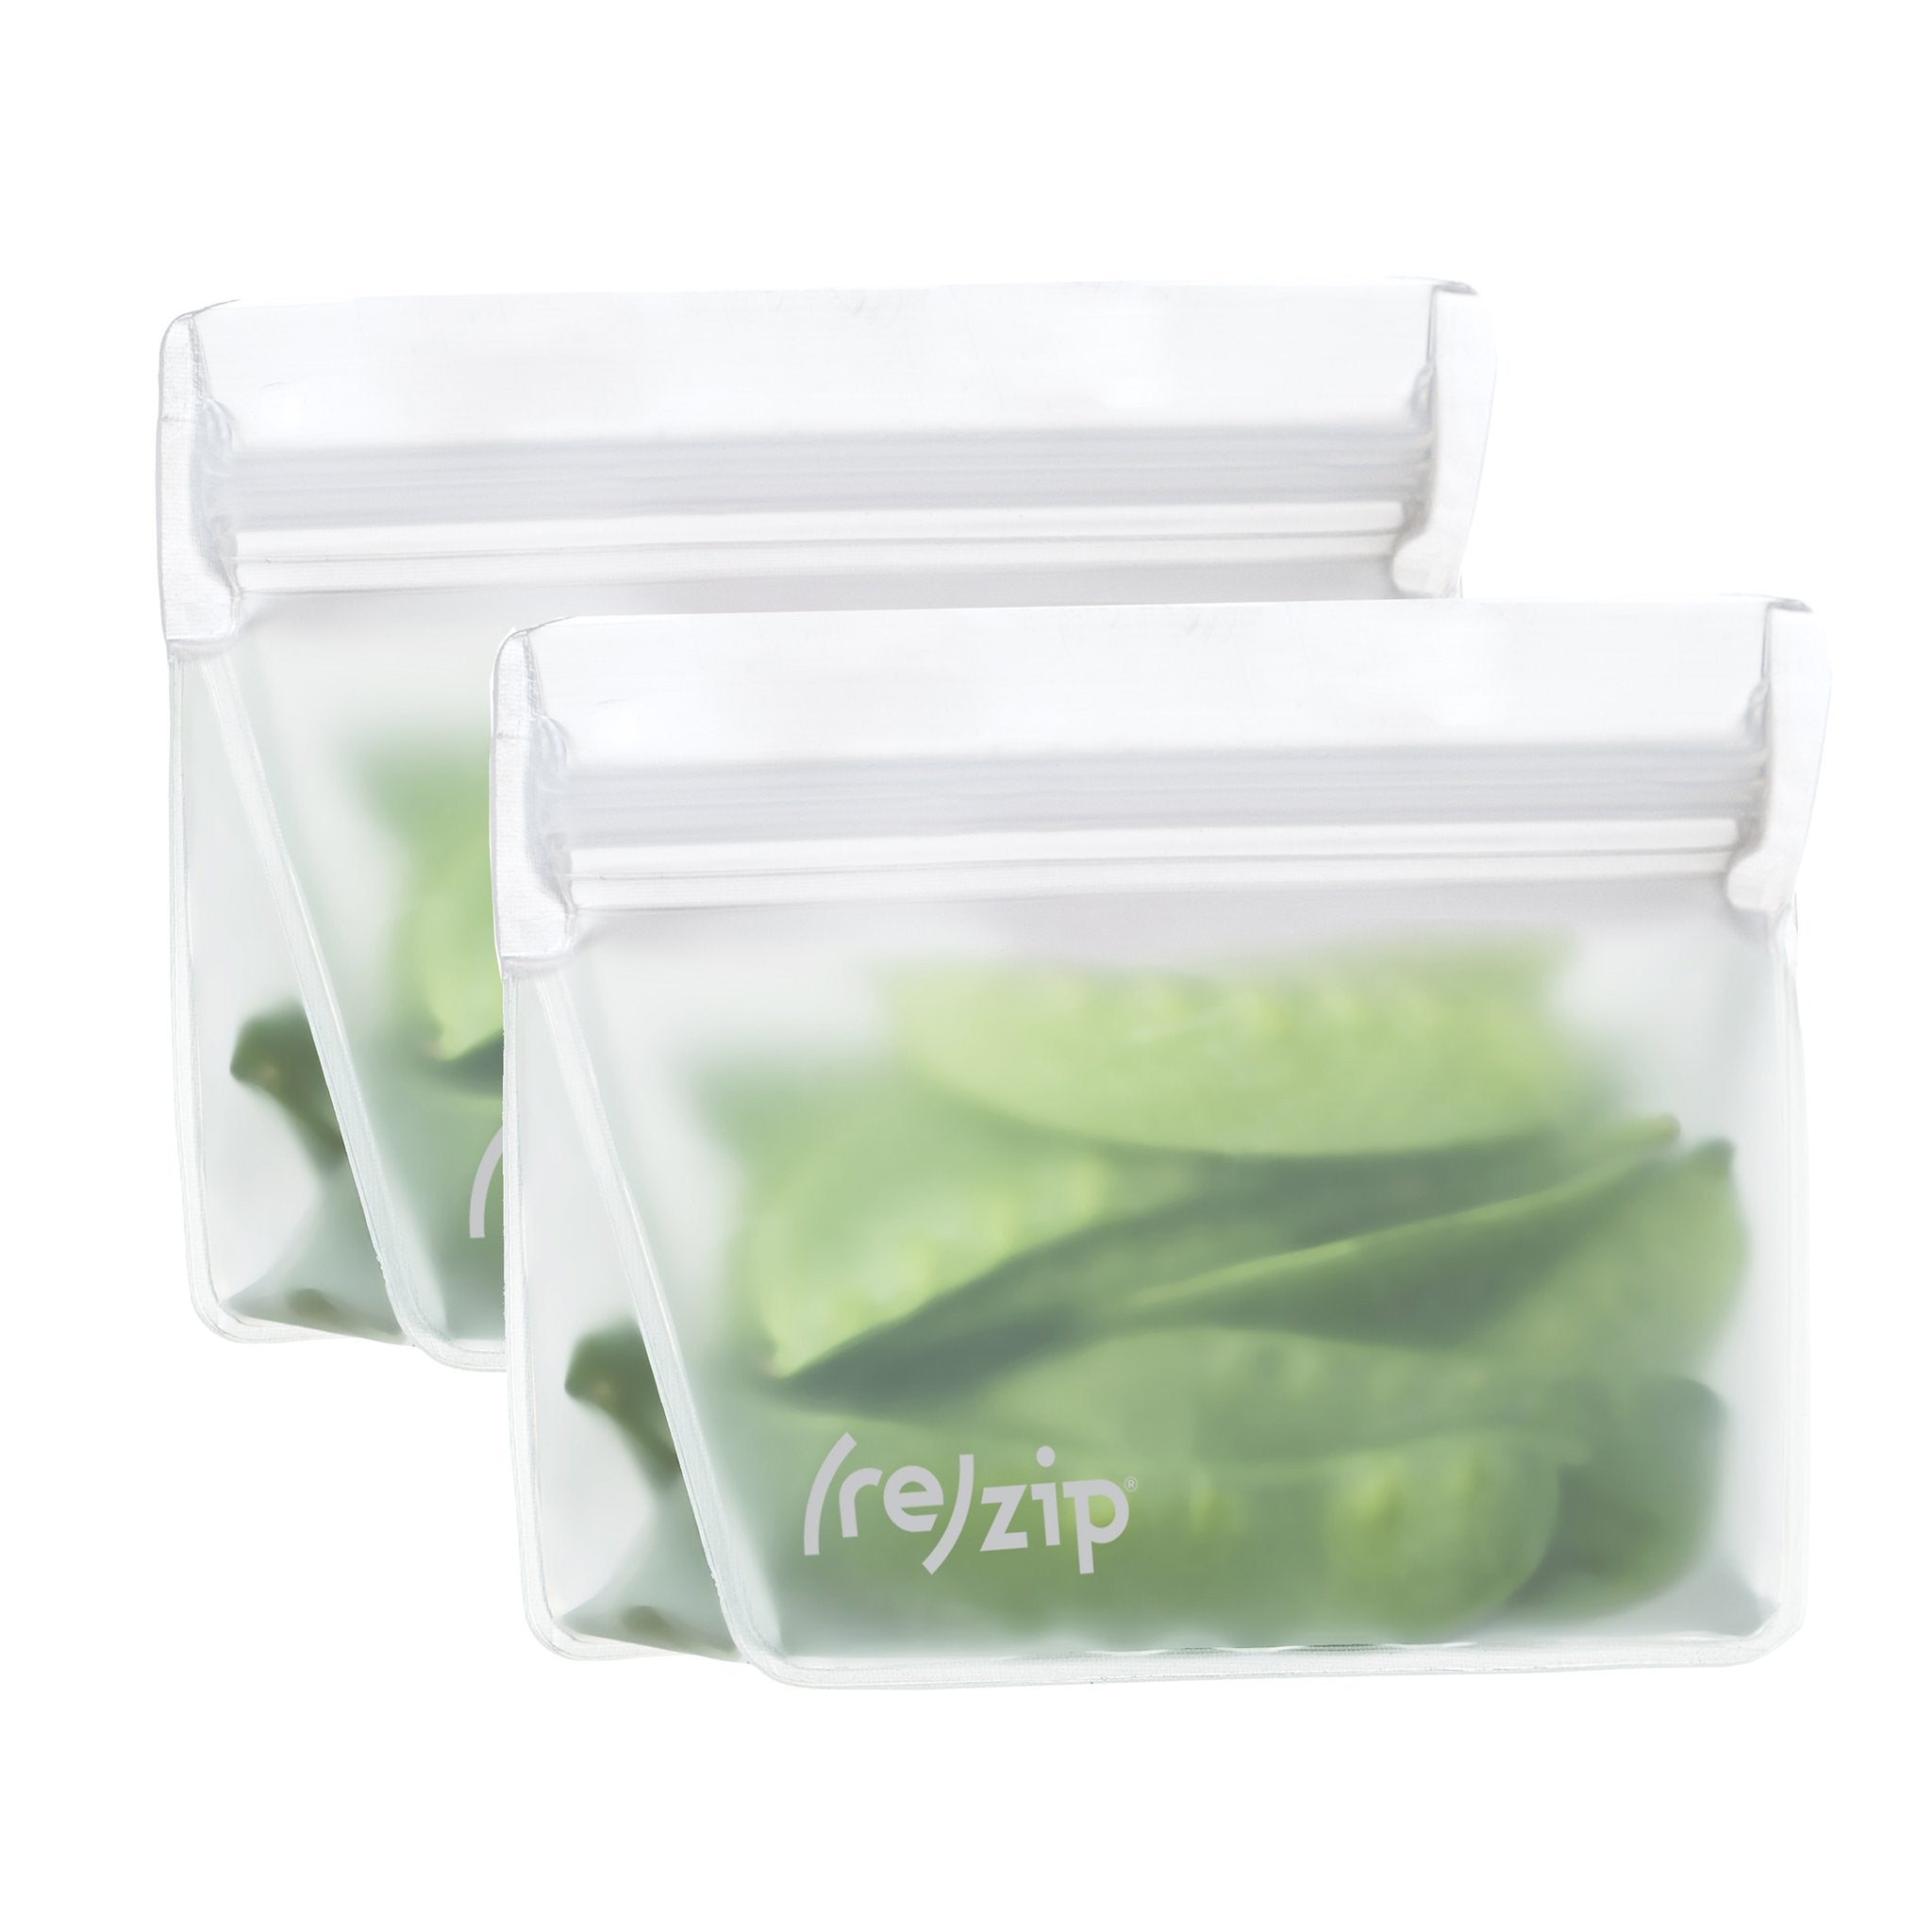 (re)zip - 1 Cup Stand Up Storage Bag (2 Pack) Zero Waste Chilliwack All Things Being Eco